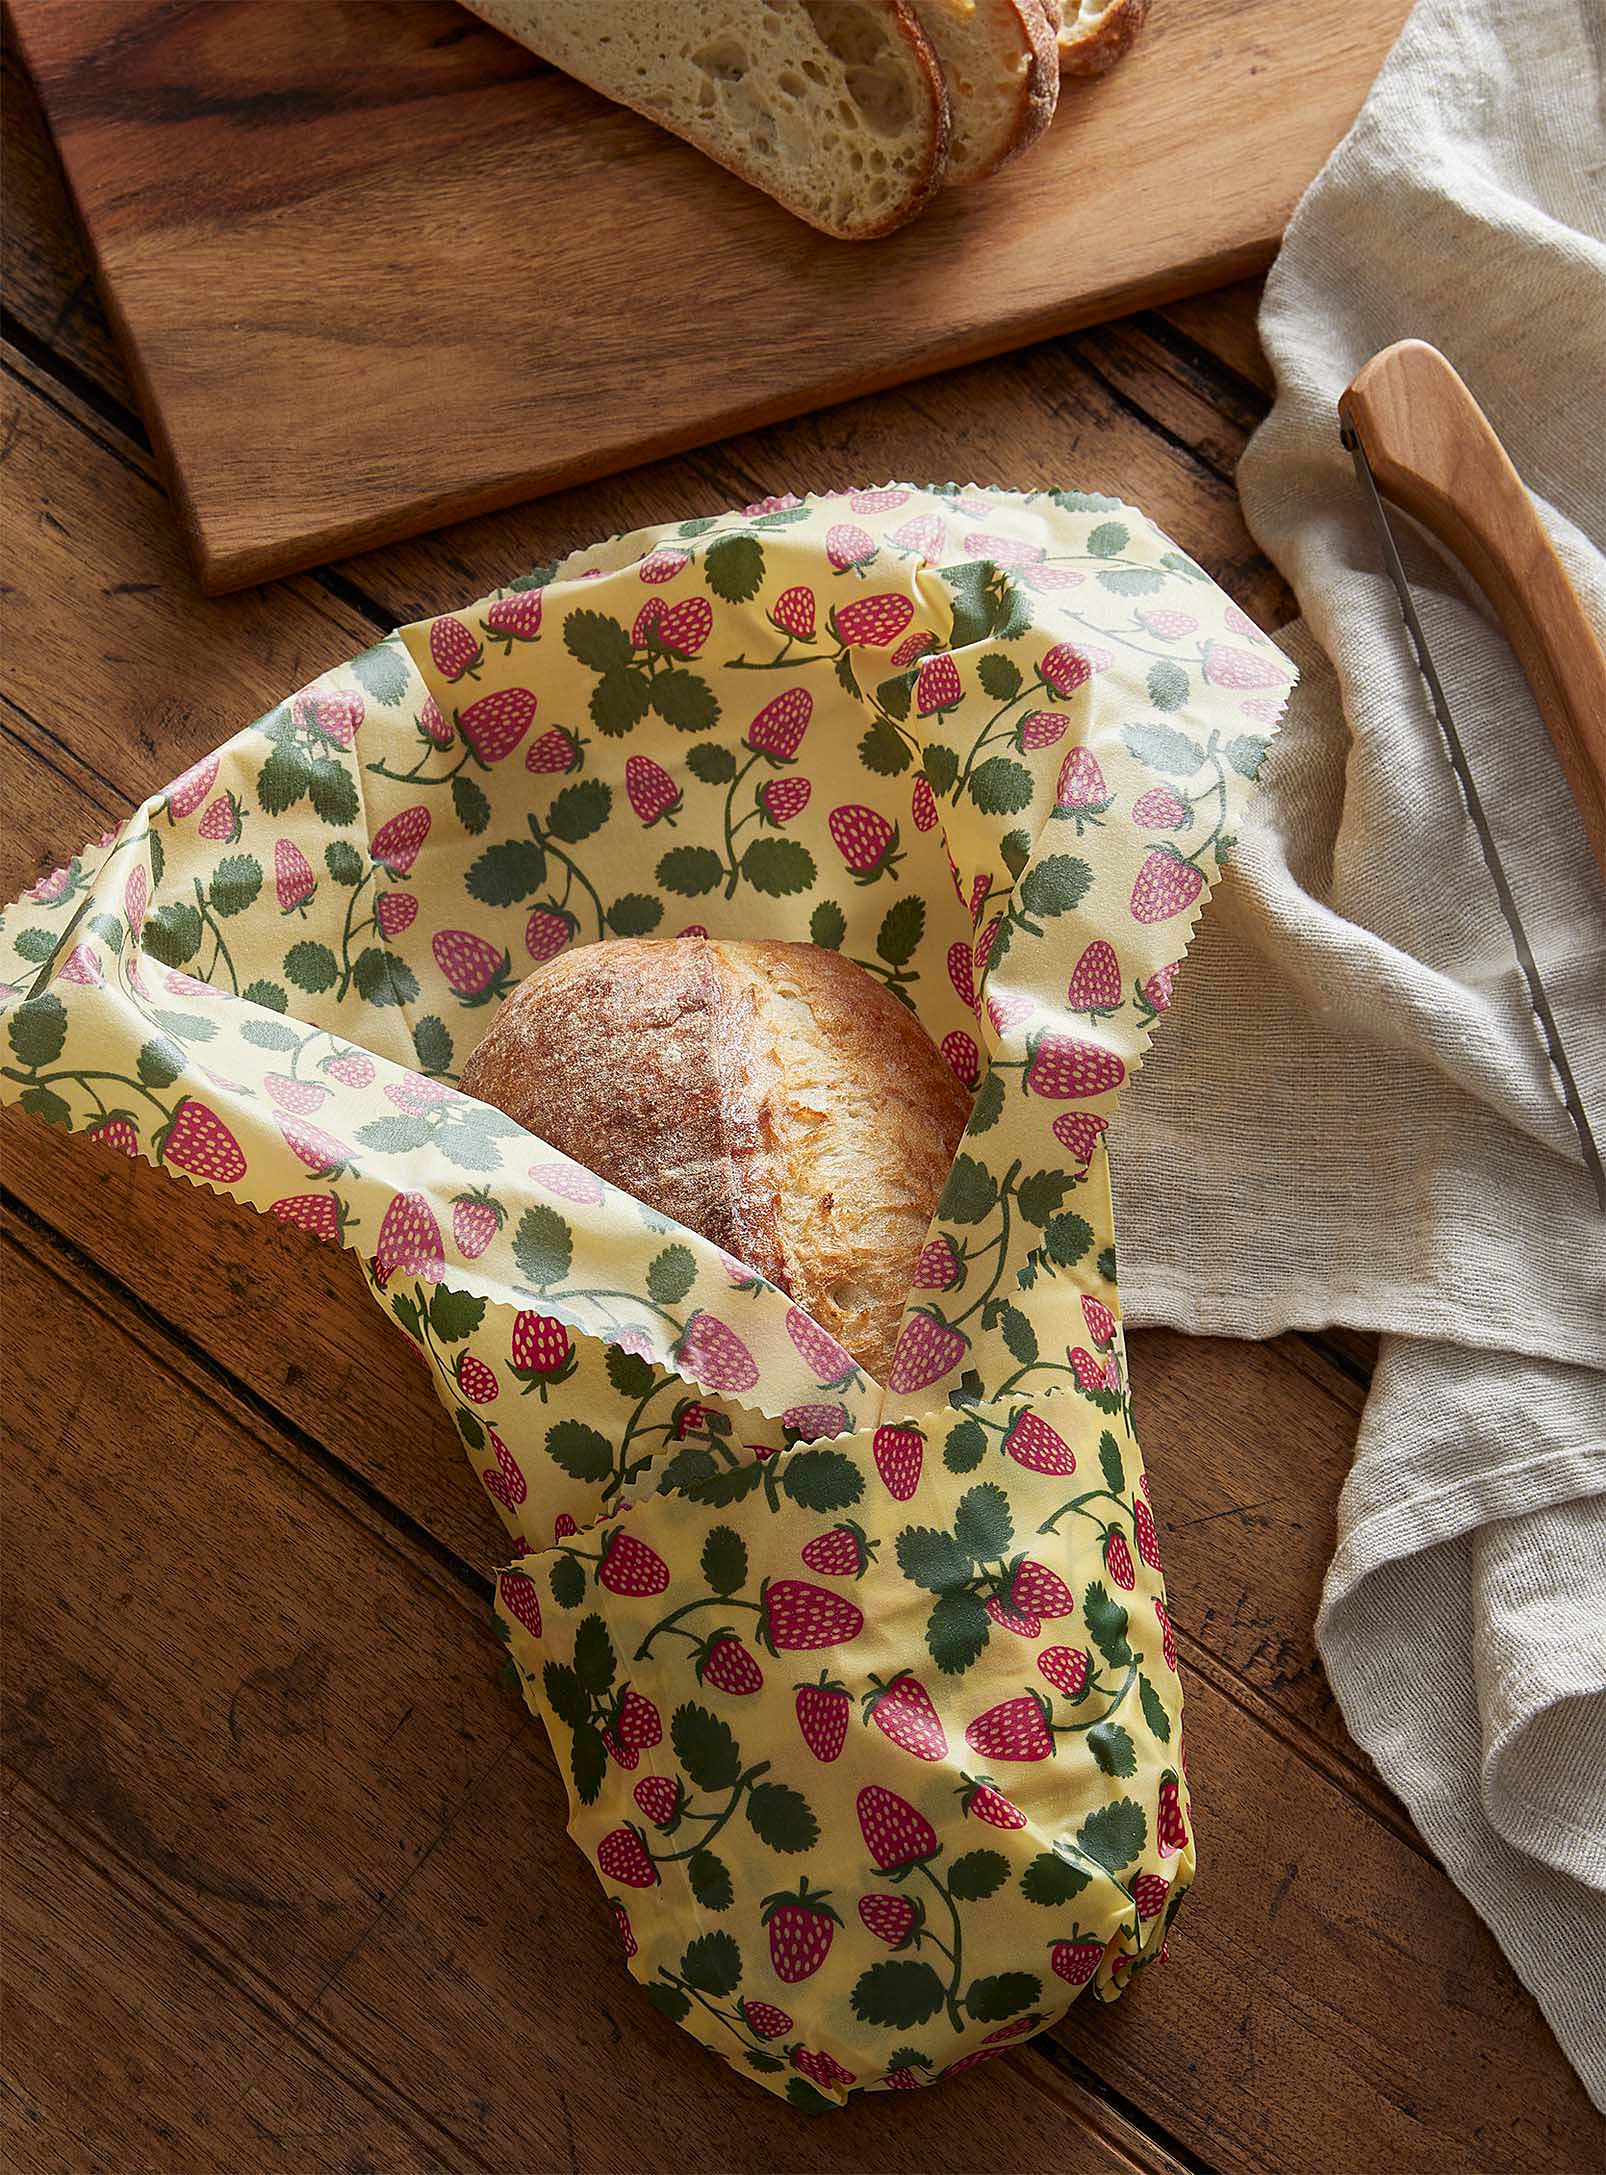 A large beeswax wrap in a strawberry print wrapped around a loaf of bread